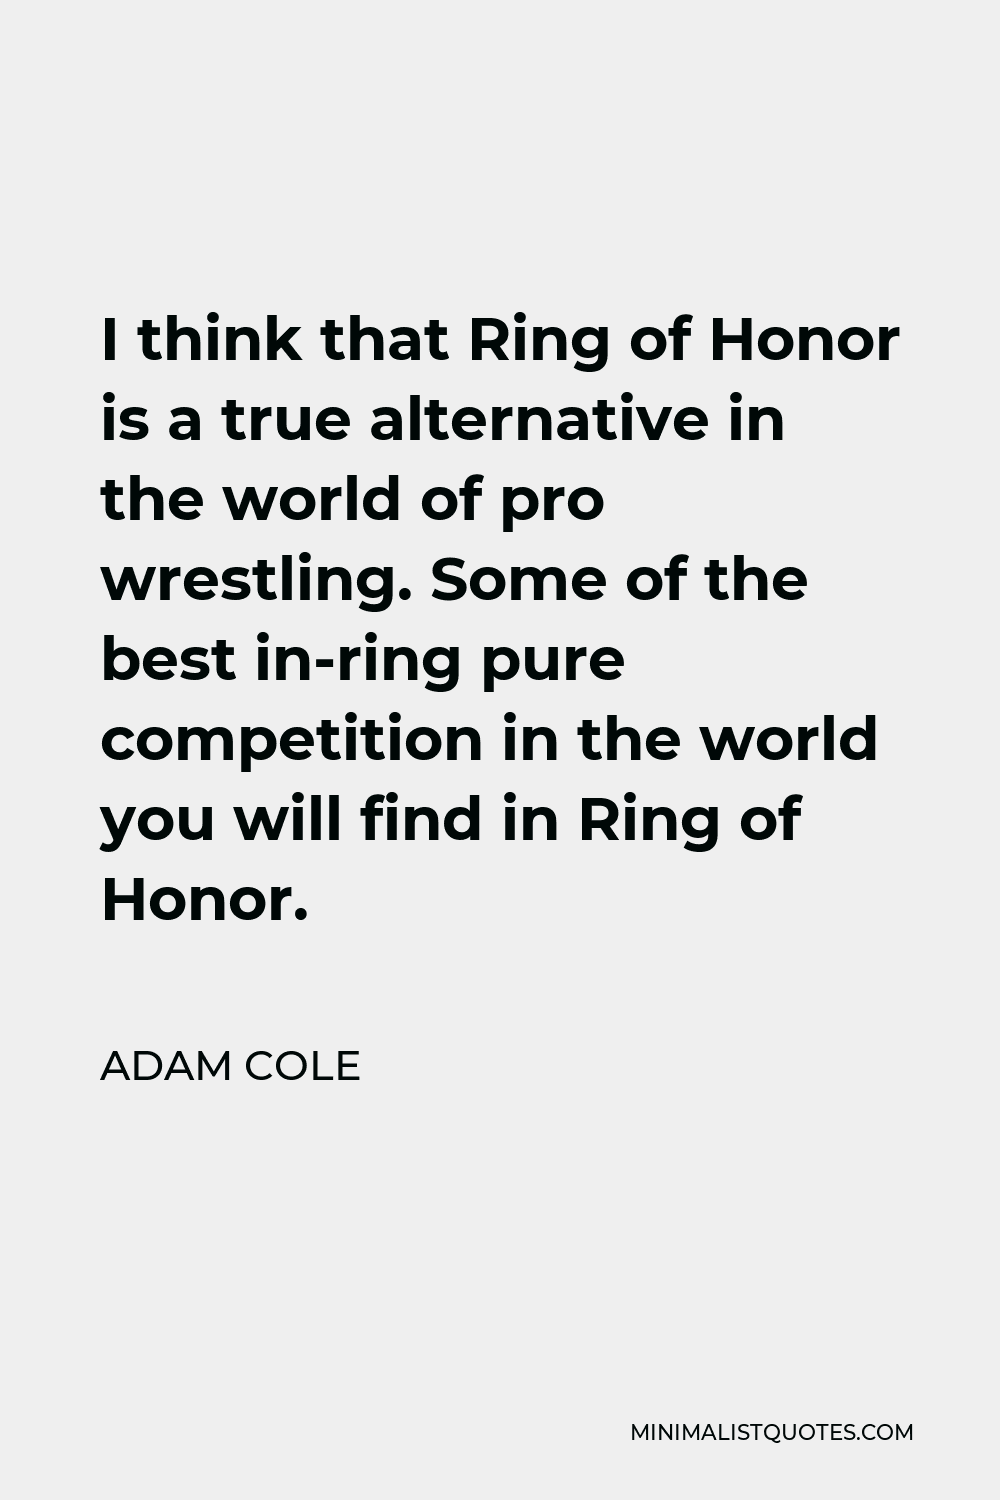 Adam Cole Quote - I think that Ring of Honor is a true alternative in the world of pro wrestling. Some of the best in-ring pure competition in the world you will find in Ring of Honor.